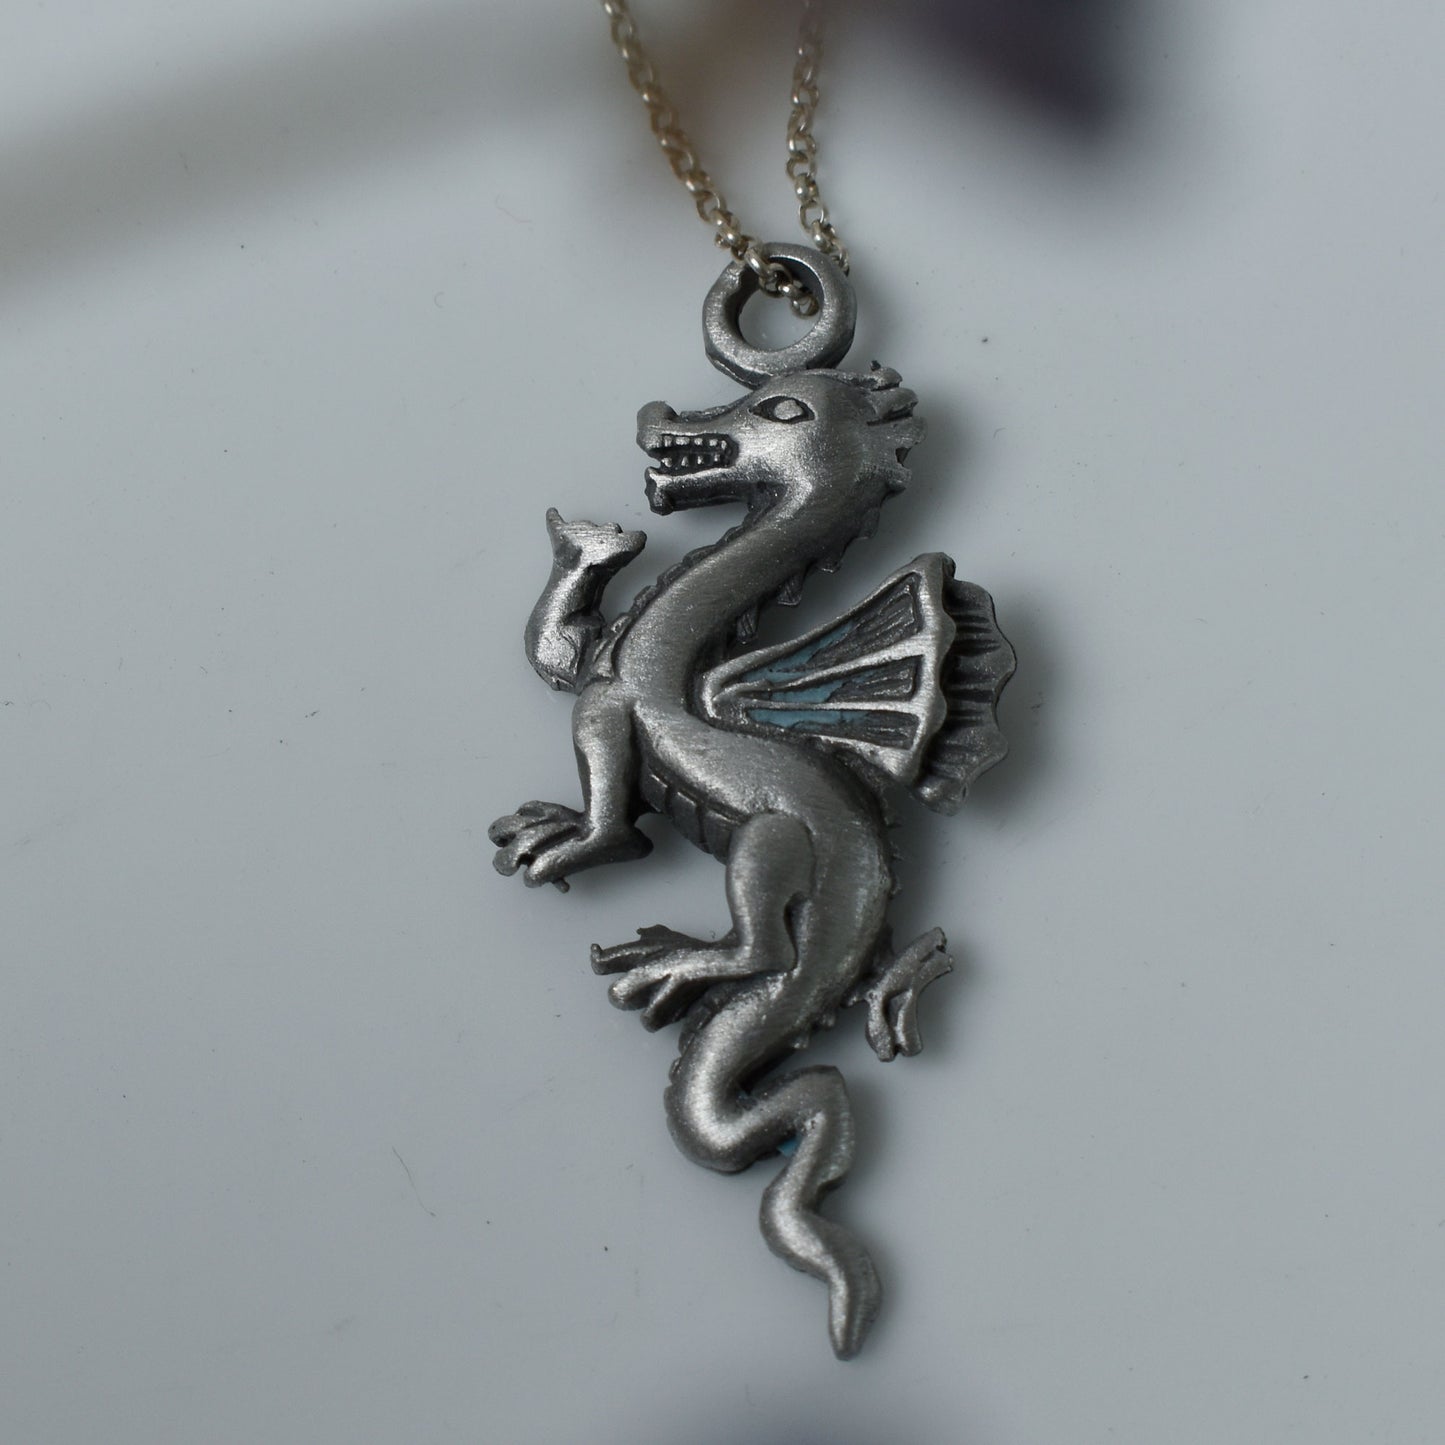 Unique Fire Dragon Silver Pewter Charm Necklace Pendant Jewelry